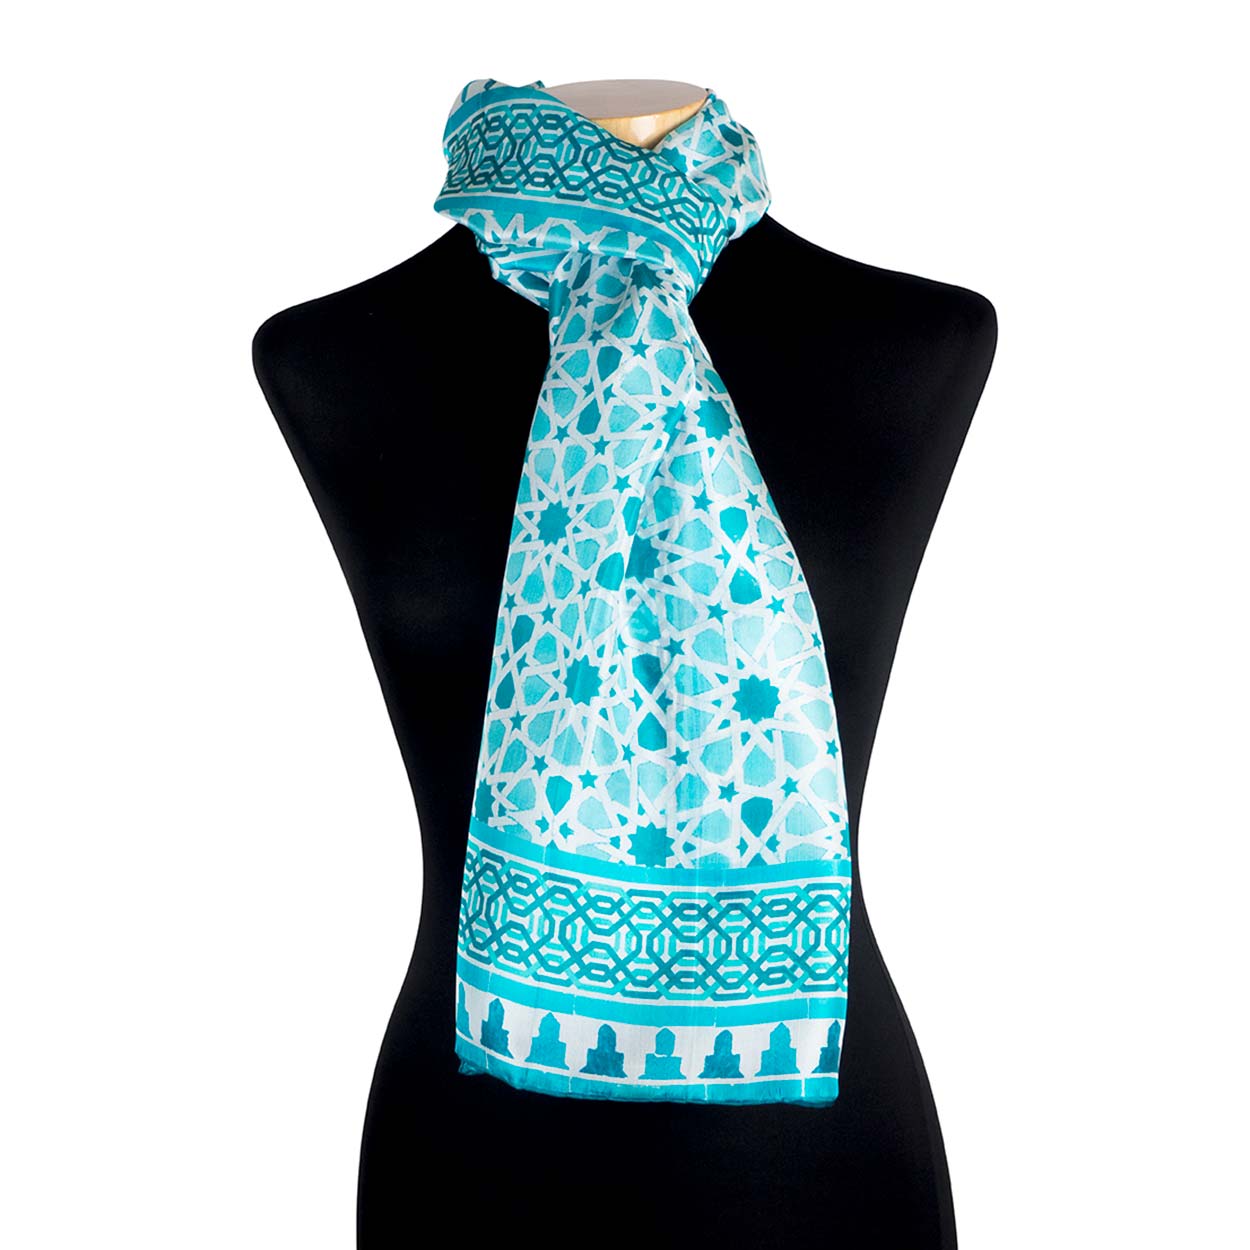 Blue silk neckerchief inspired by Alhambra Palace mosaic tiles